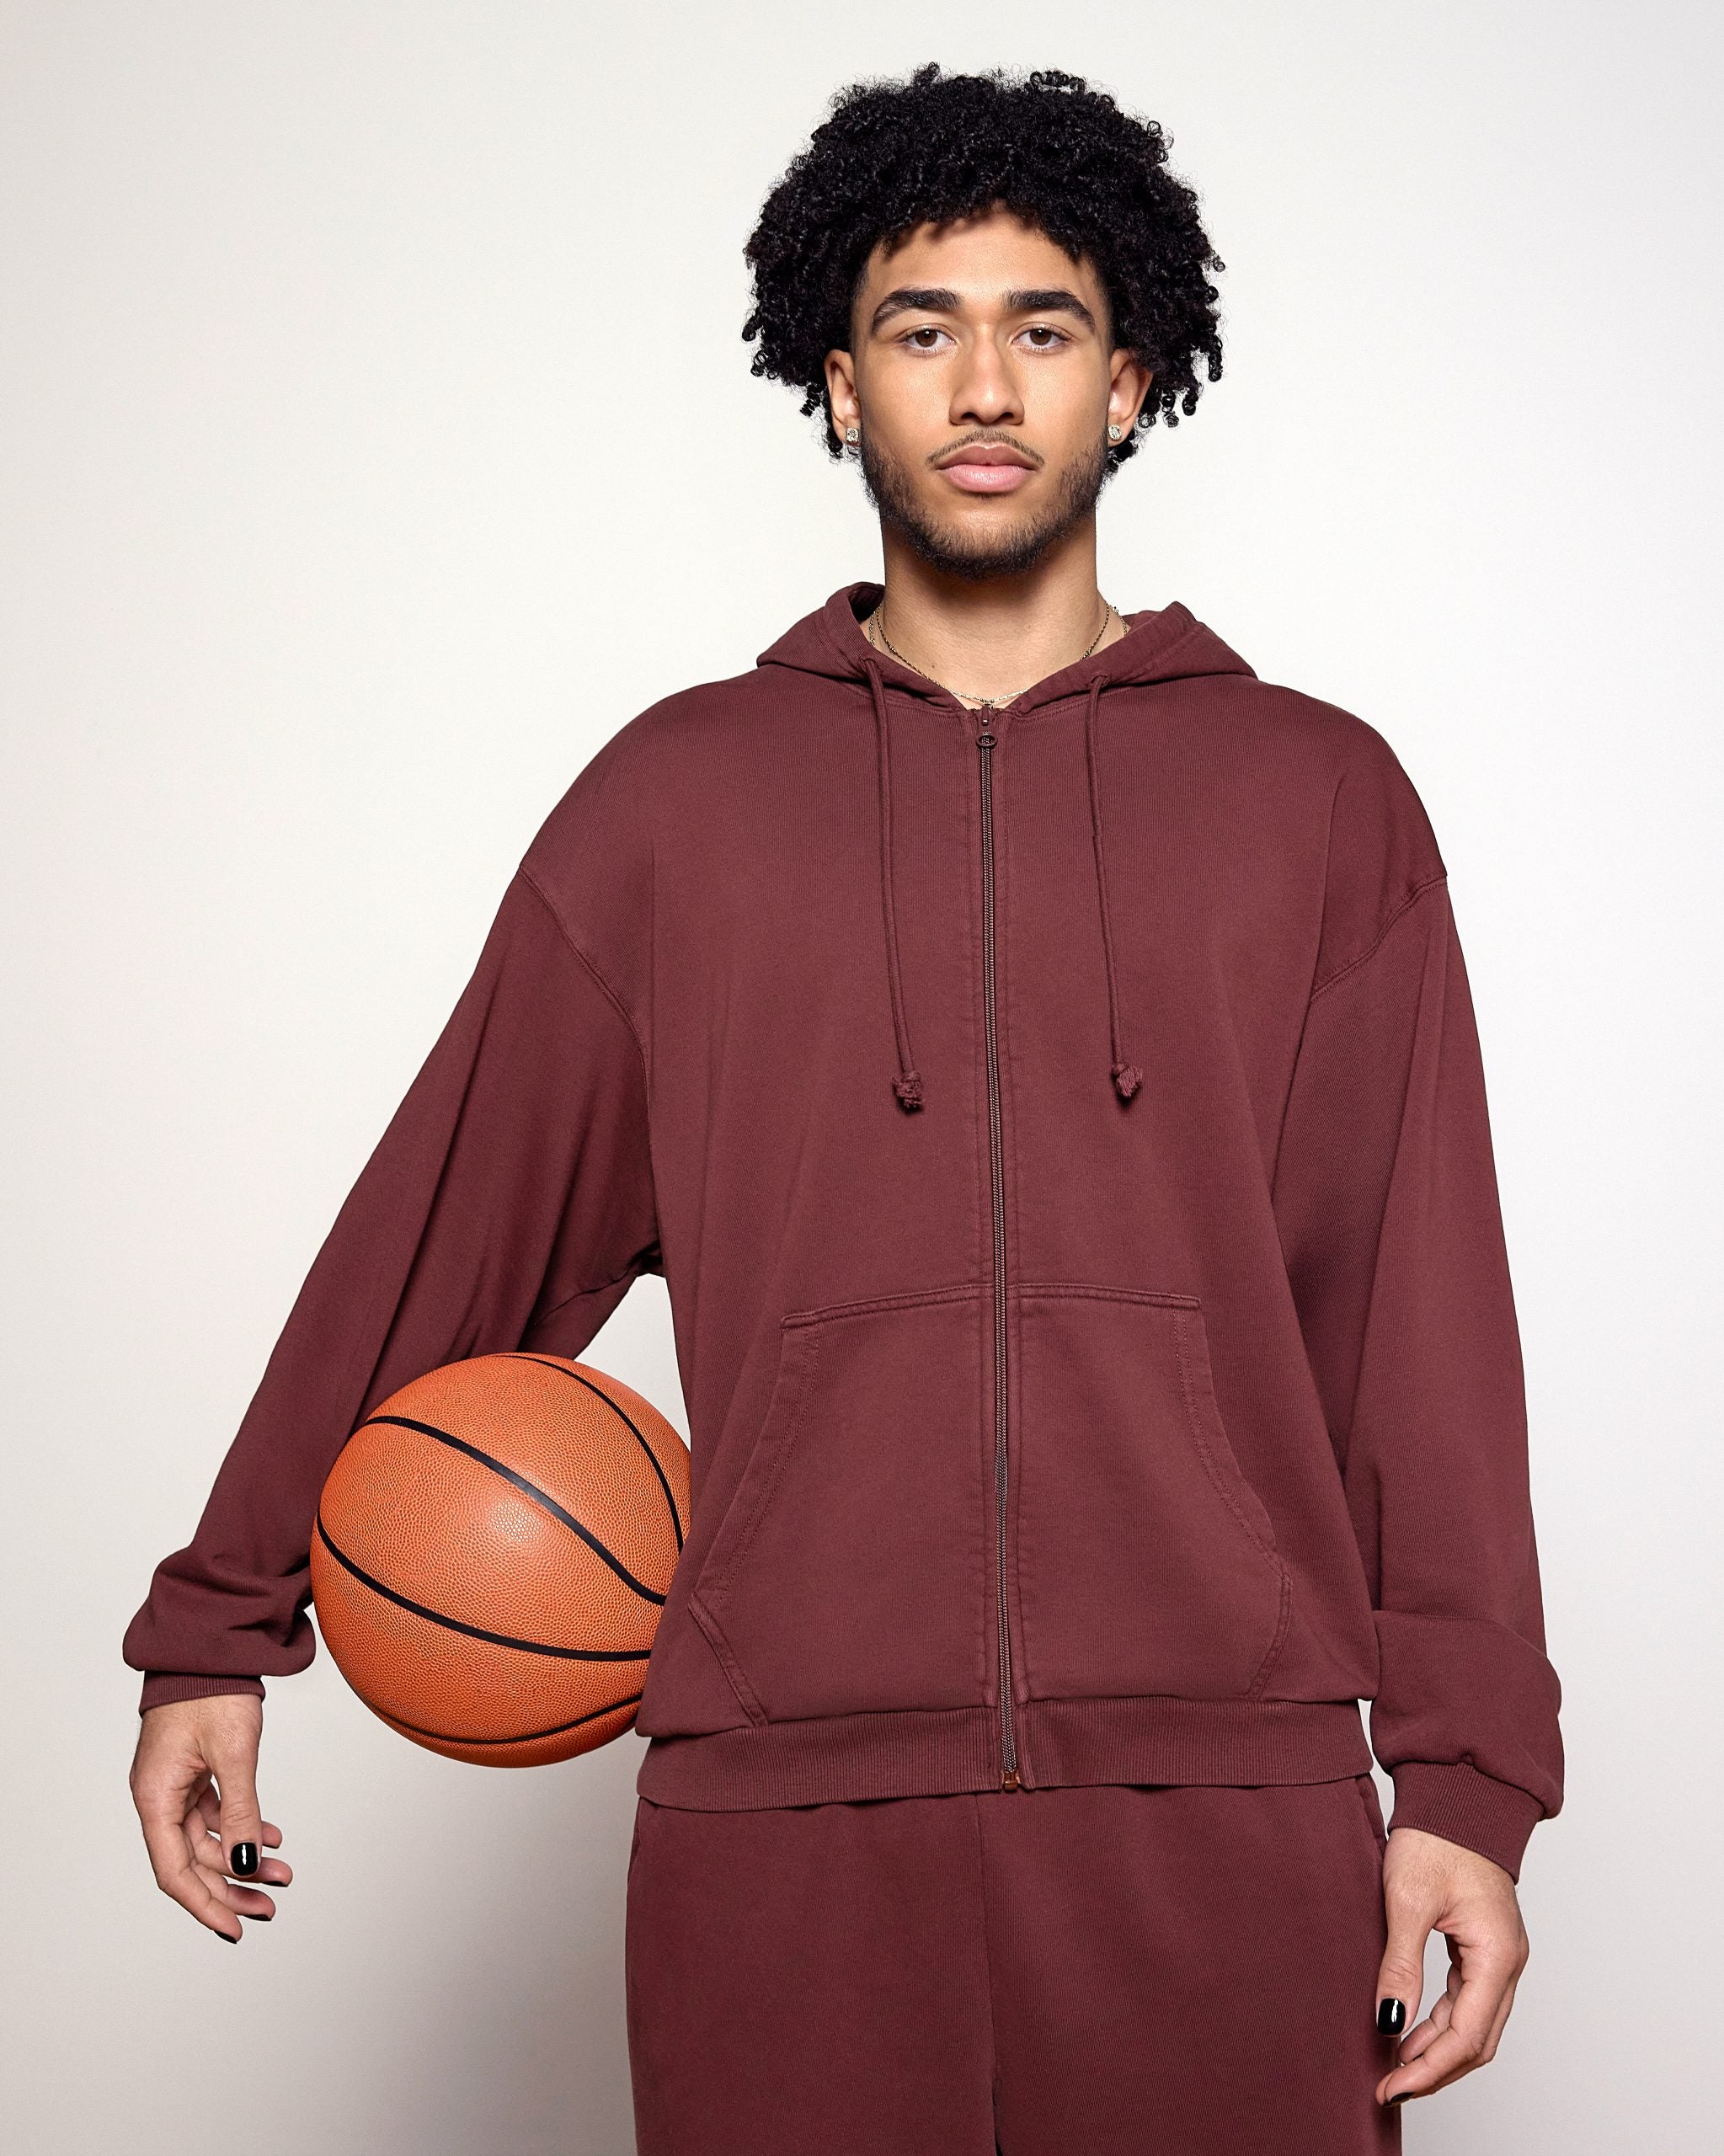 SKIMS Drops A Menswear Collection Featuring College Basketball Players